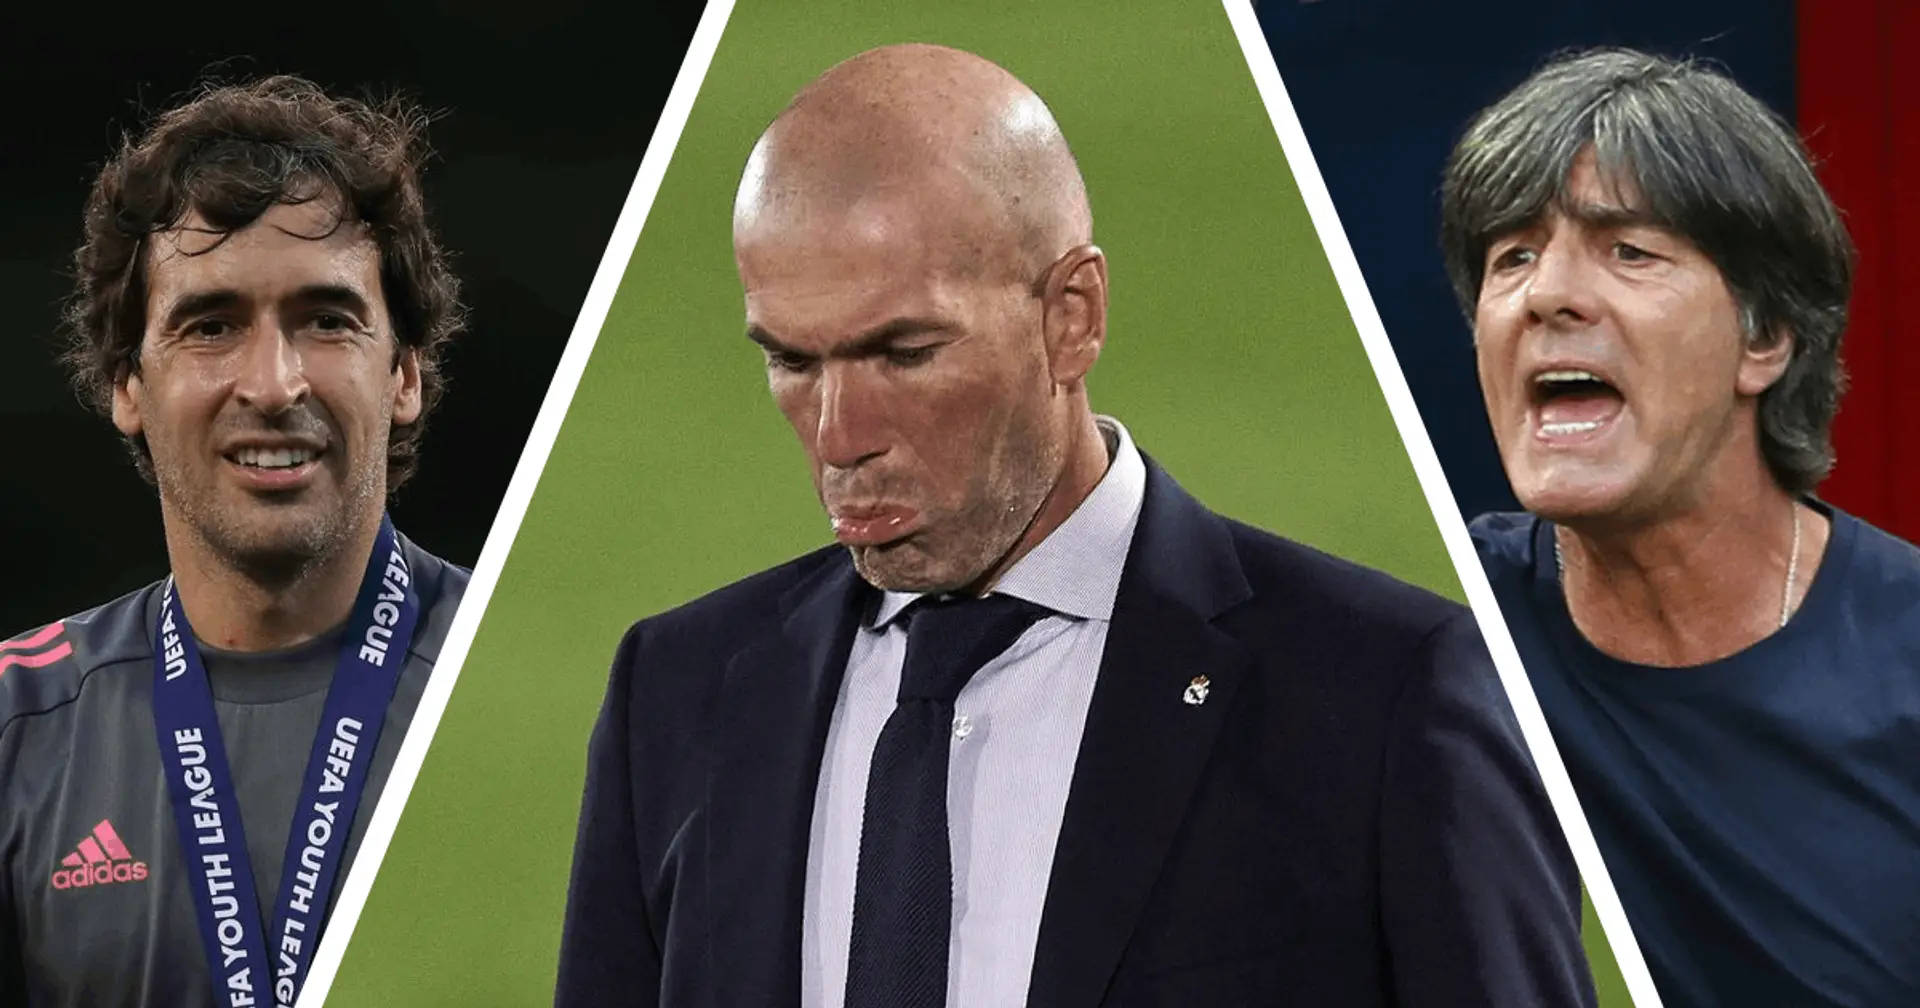 Real Madrid reportedly consider Raul and Joachim Low as potential replacement for Zidane